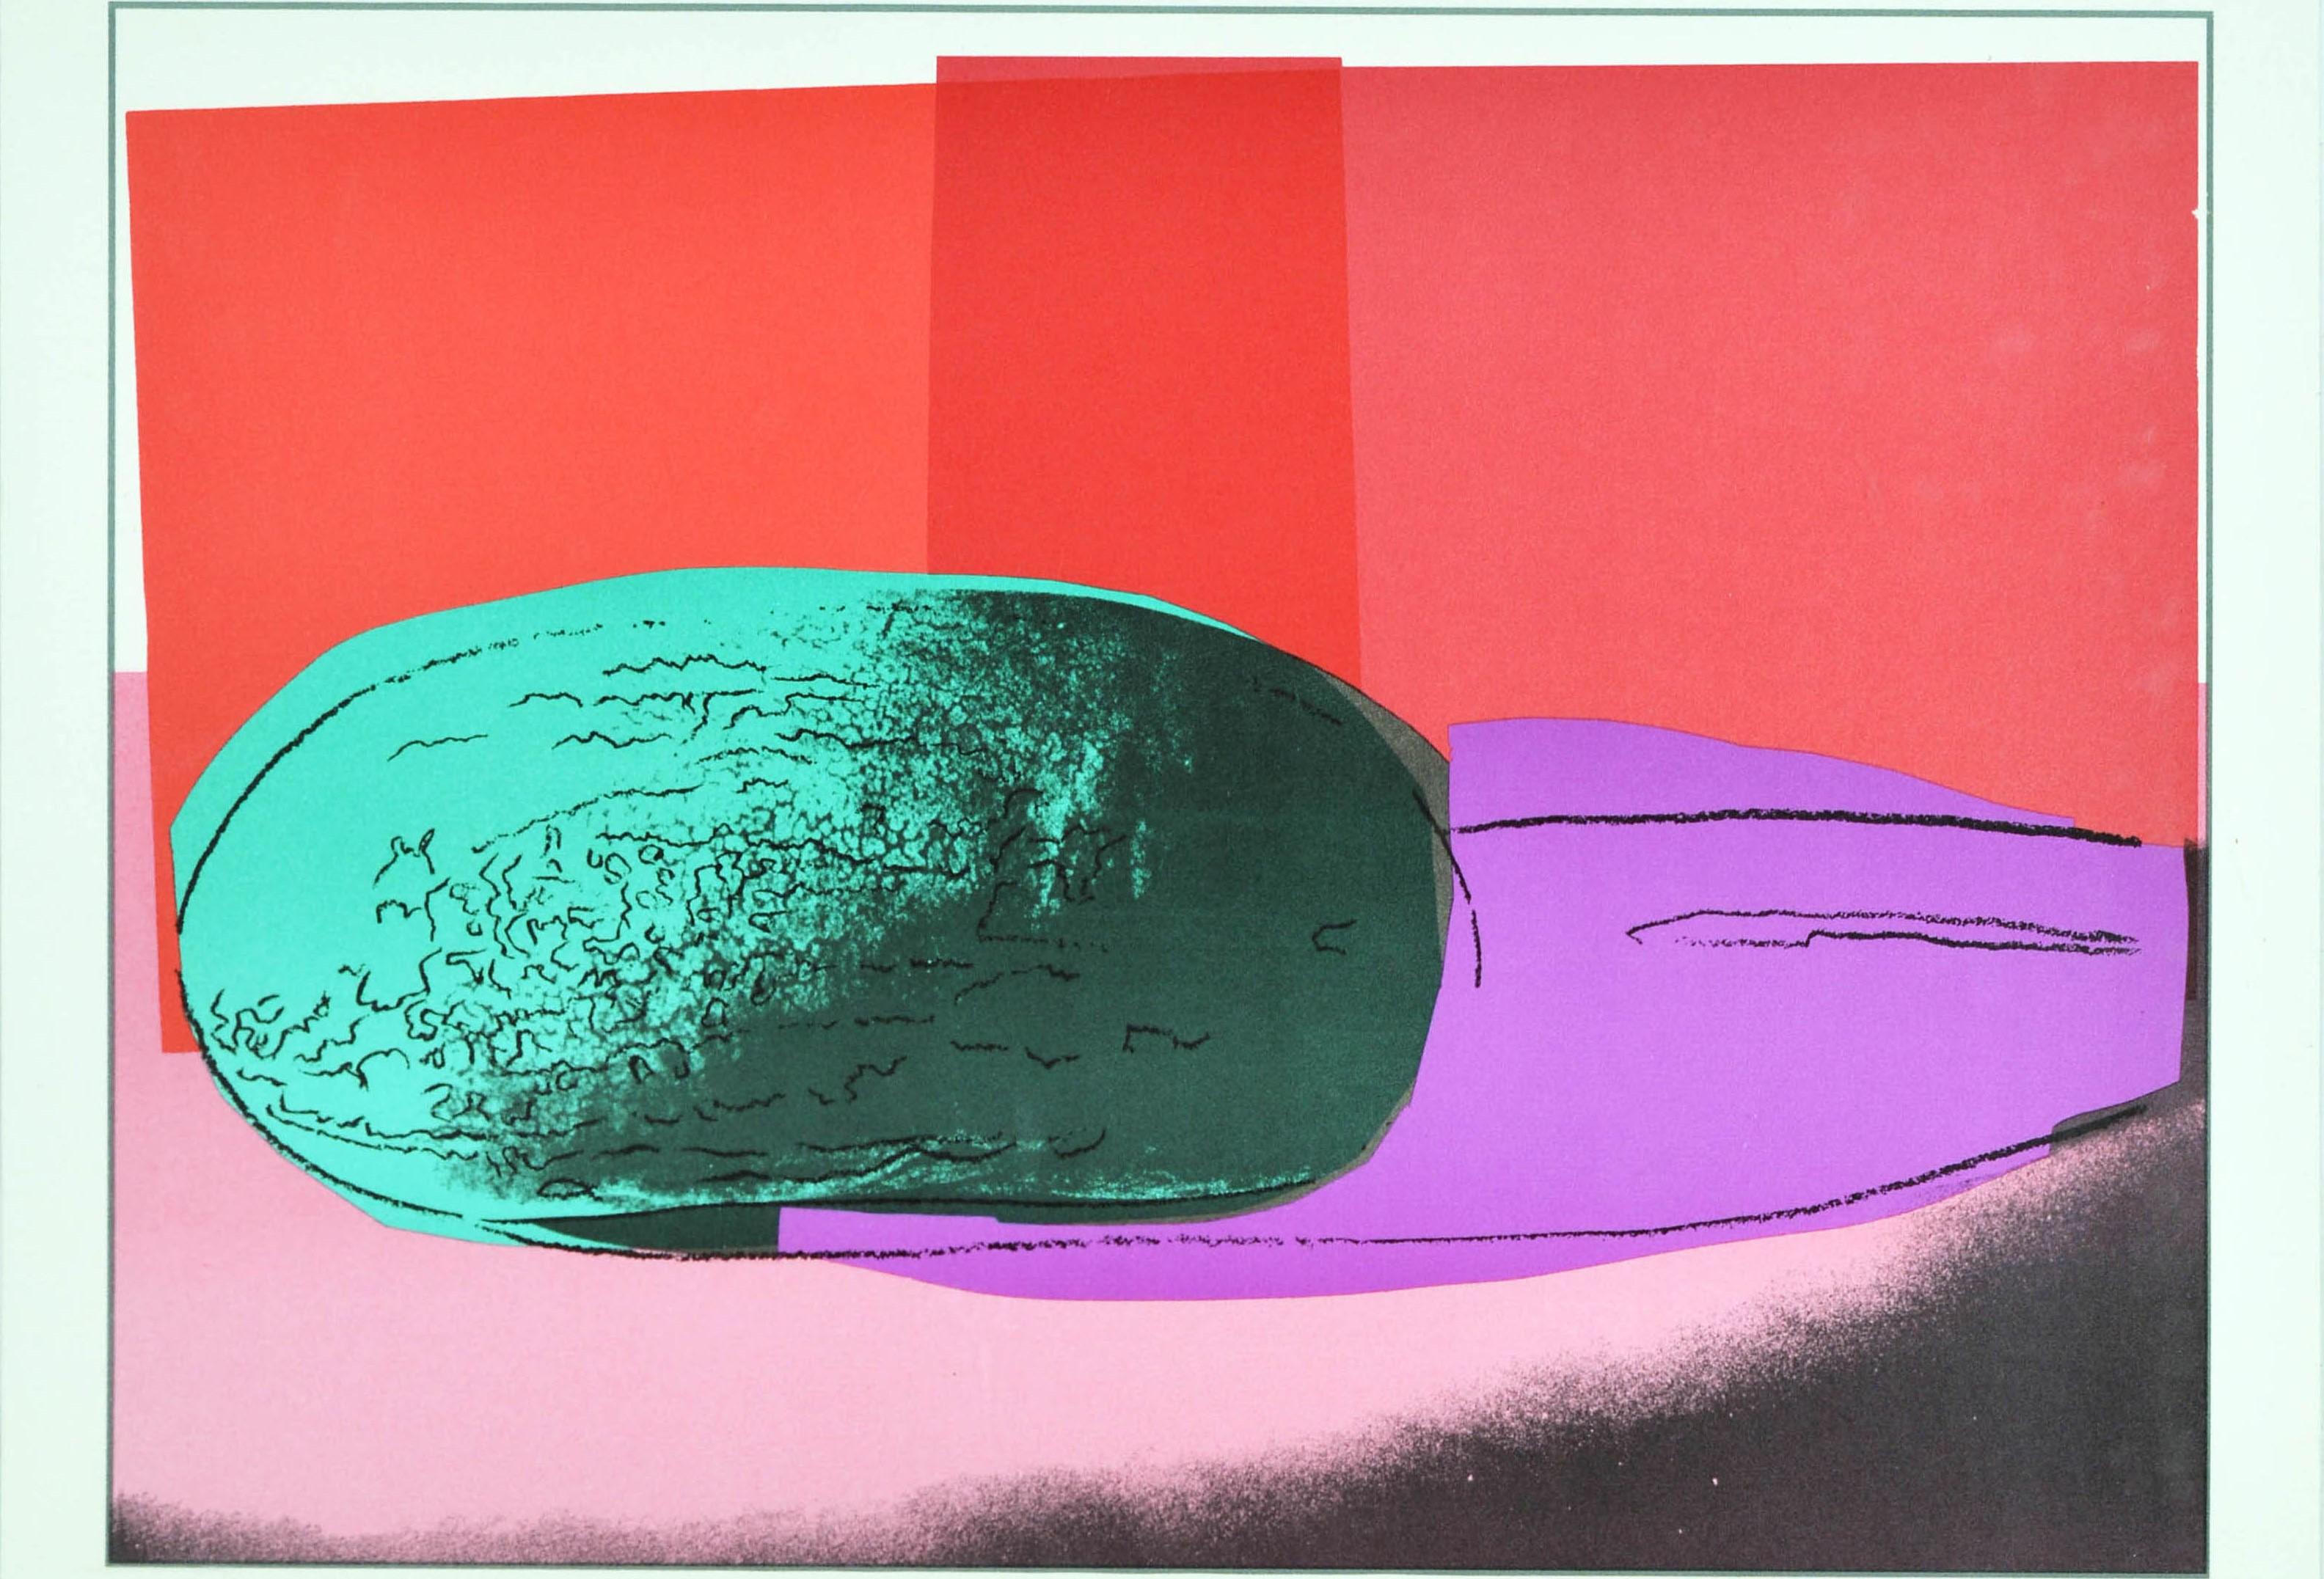 Original vintage poster advertising an exhibition of prints by the notable artist Andy Warhol (1928-1987) from the corporate collection of Lev/Steiner International Ltd New York Space Fruit: Still Life Suite of Serigraphs published by Michael